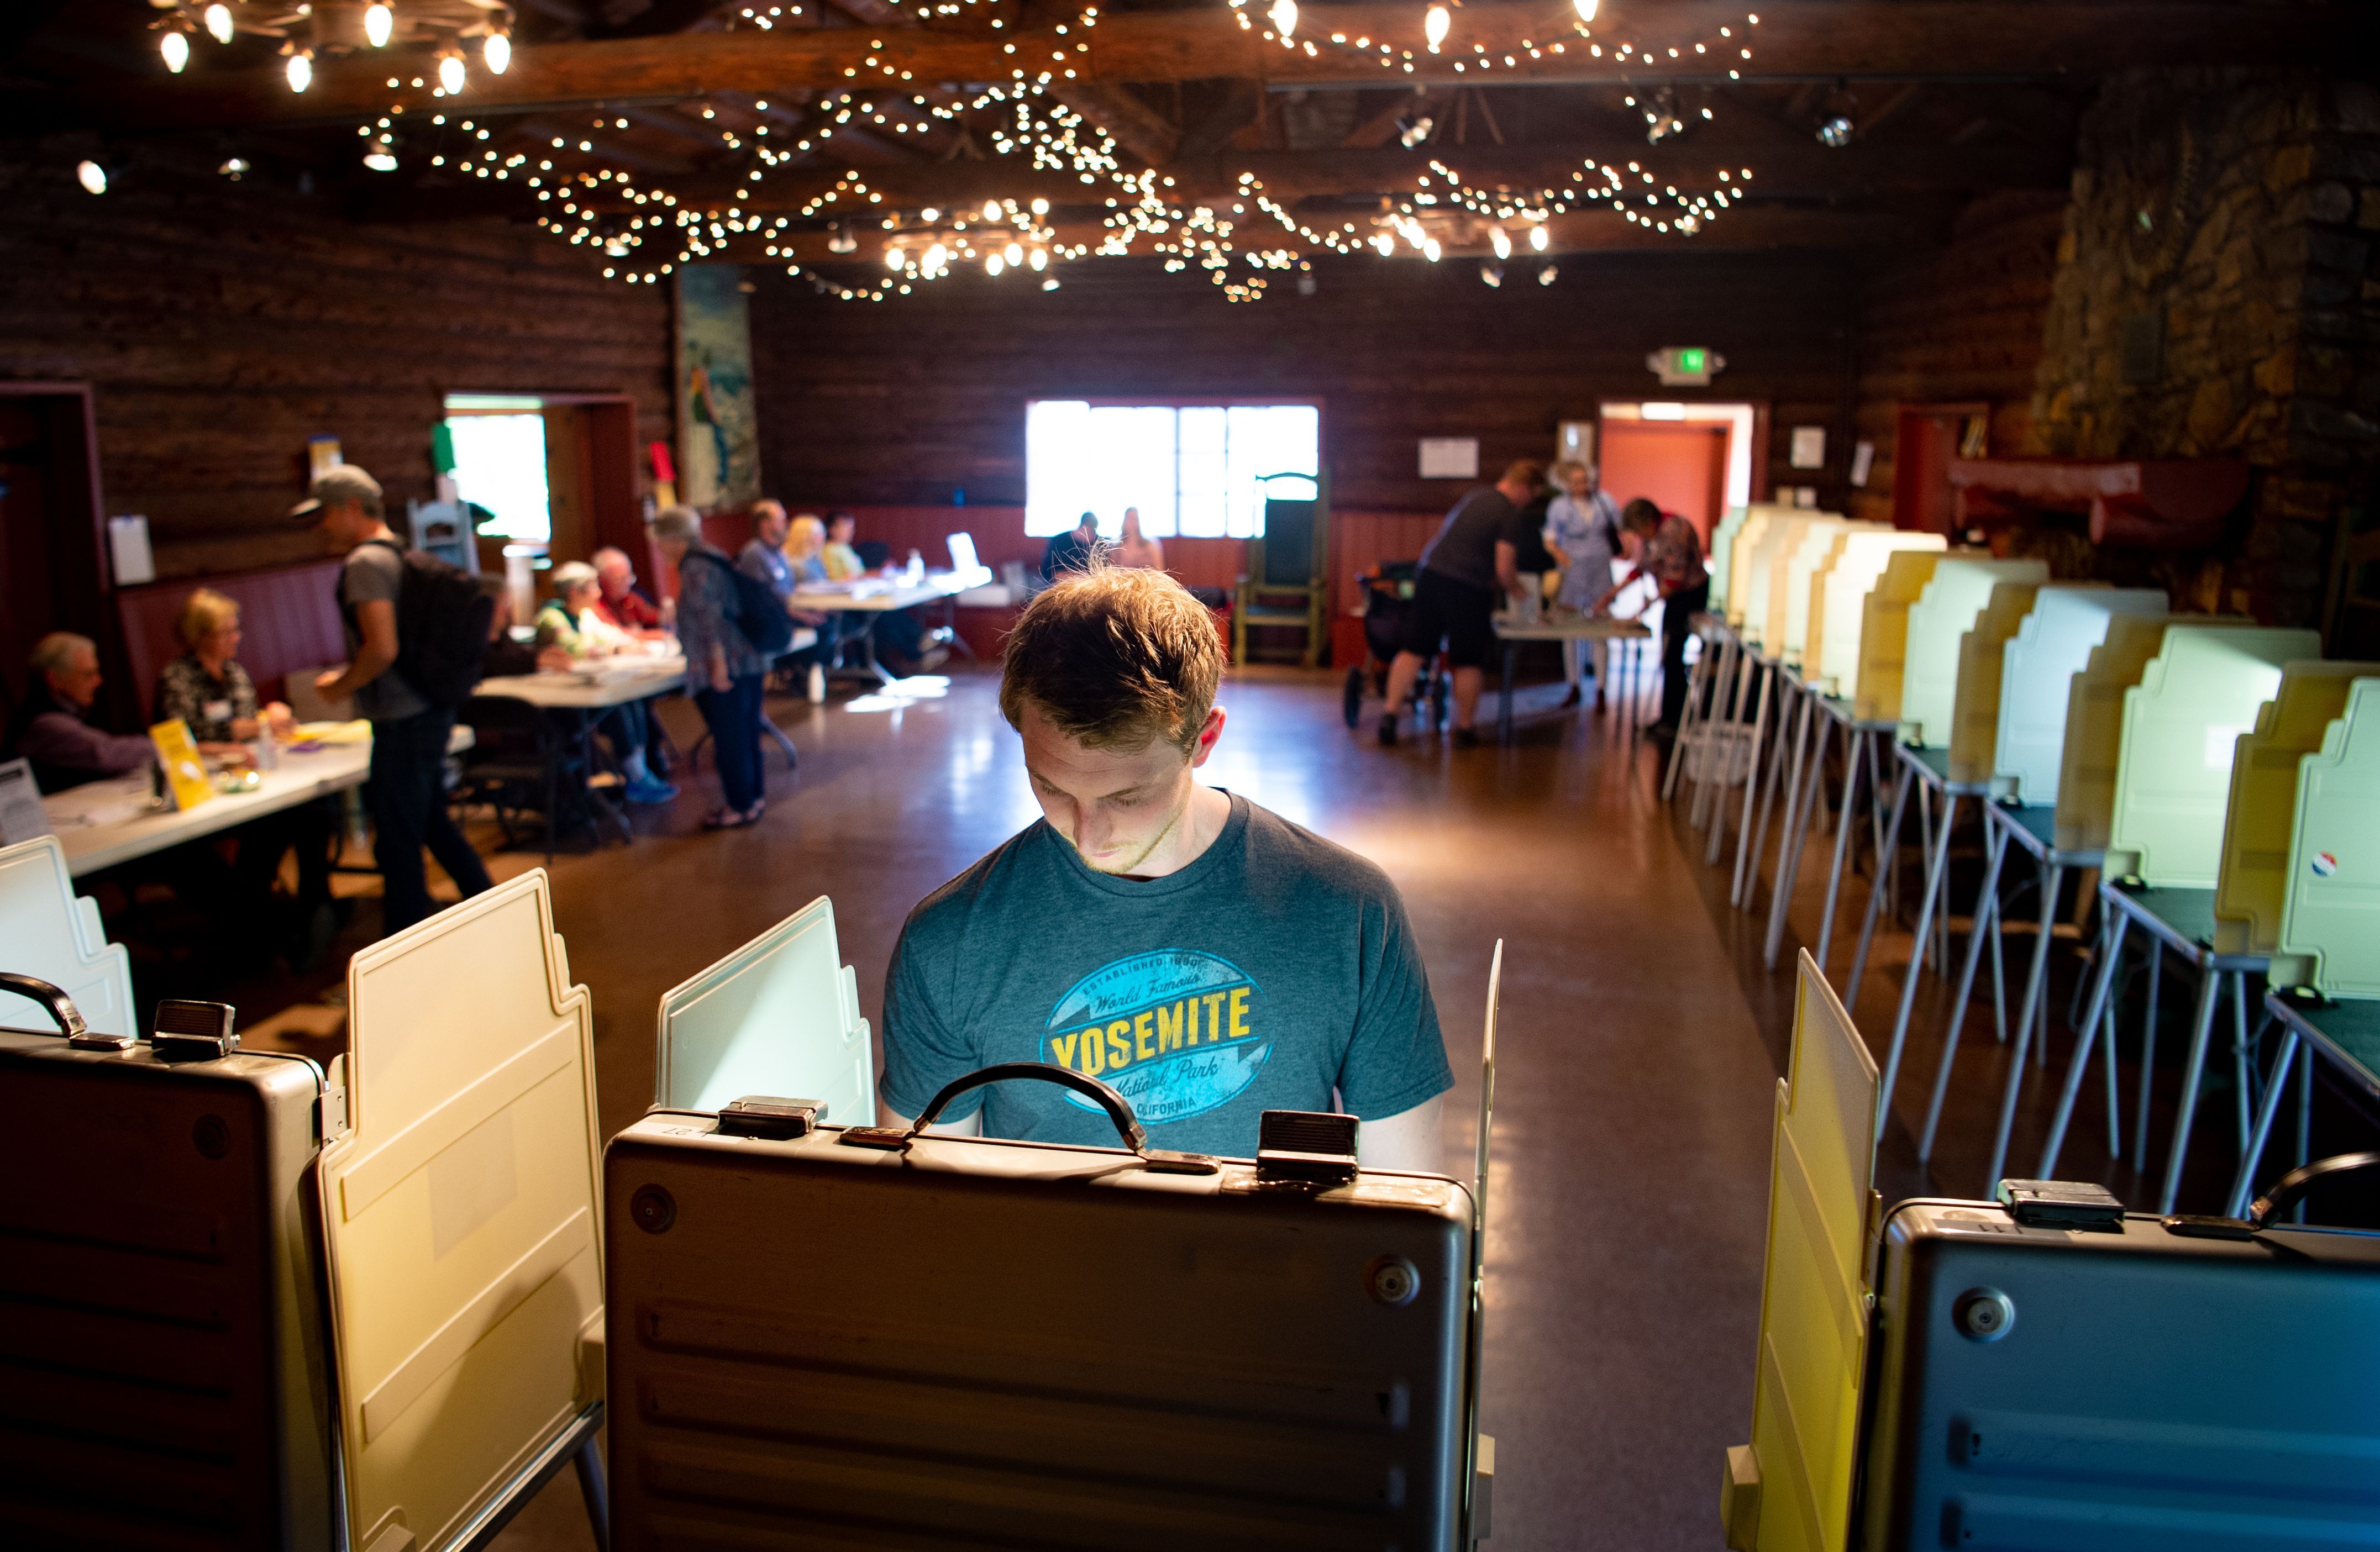 In this image, a man stands at a voting booth in. room with fairy lights on the ceiling 